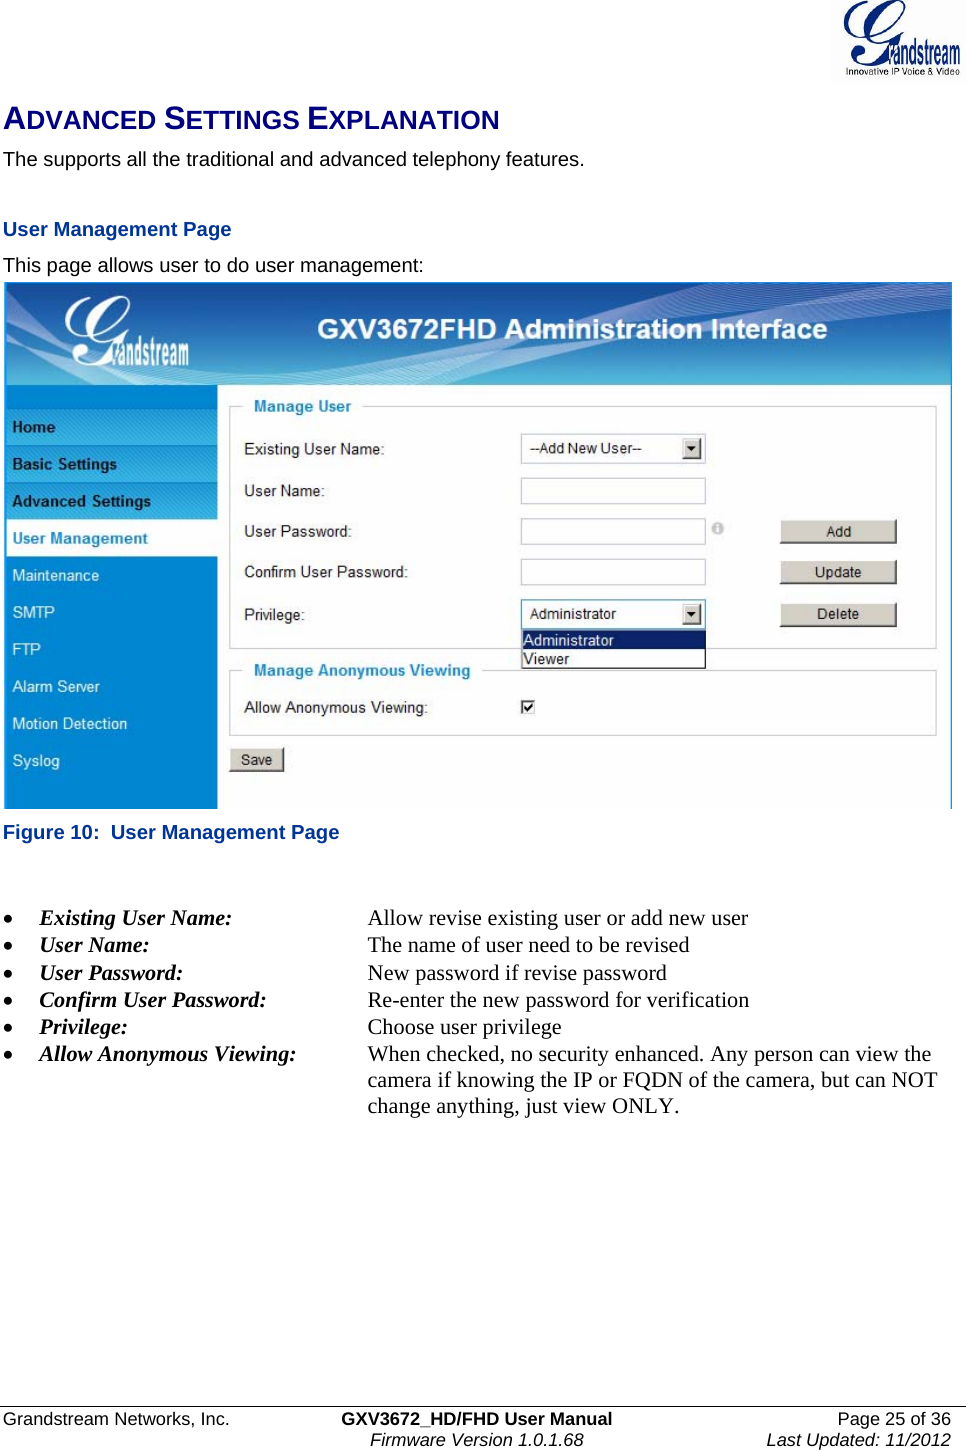  Grandstream Networks, Inc.  GXV3672_HD/FHD User Manual  Page 25 of 36    Firmware Version 1.0.1.68  Last Updated: 11/2012  ADVANCED SETTINGS EXPLANATION The supports all the traditional and advanced telephony features.     User Management Page  This page allows user to do user management:  Figure 10:  User Management Page  • Existing User Name:     Allow revise existing user or add new user • User Name:      The name of user need to be revised • User Password:       New password if revise password • Confirm User Password:     Re-enter the new password for verification • Privilege:     Choose user privilege • Allow Anonymous Viewing:  When checked, no security enhanced. Any person can view the       camera if knowing the IP or FQDN of the camera, but can NOT            change anything, just view ONLY.    